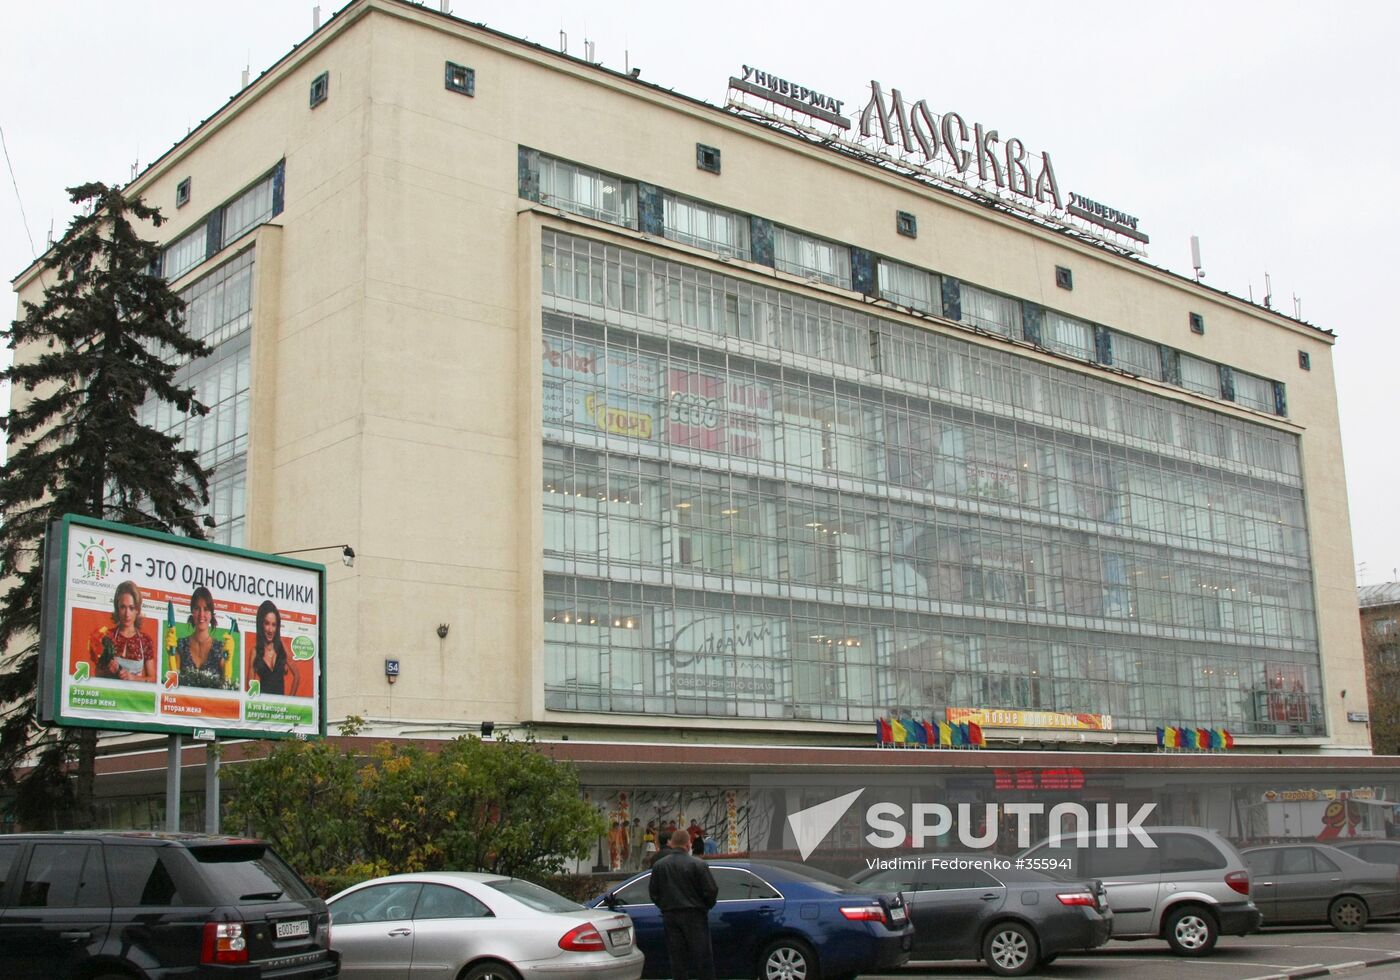 The Moskva department store